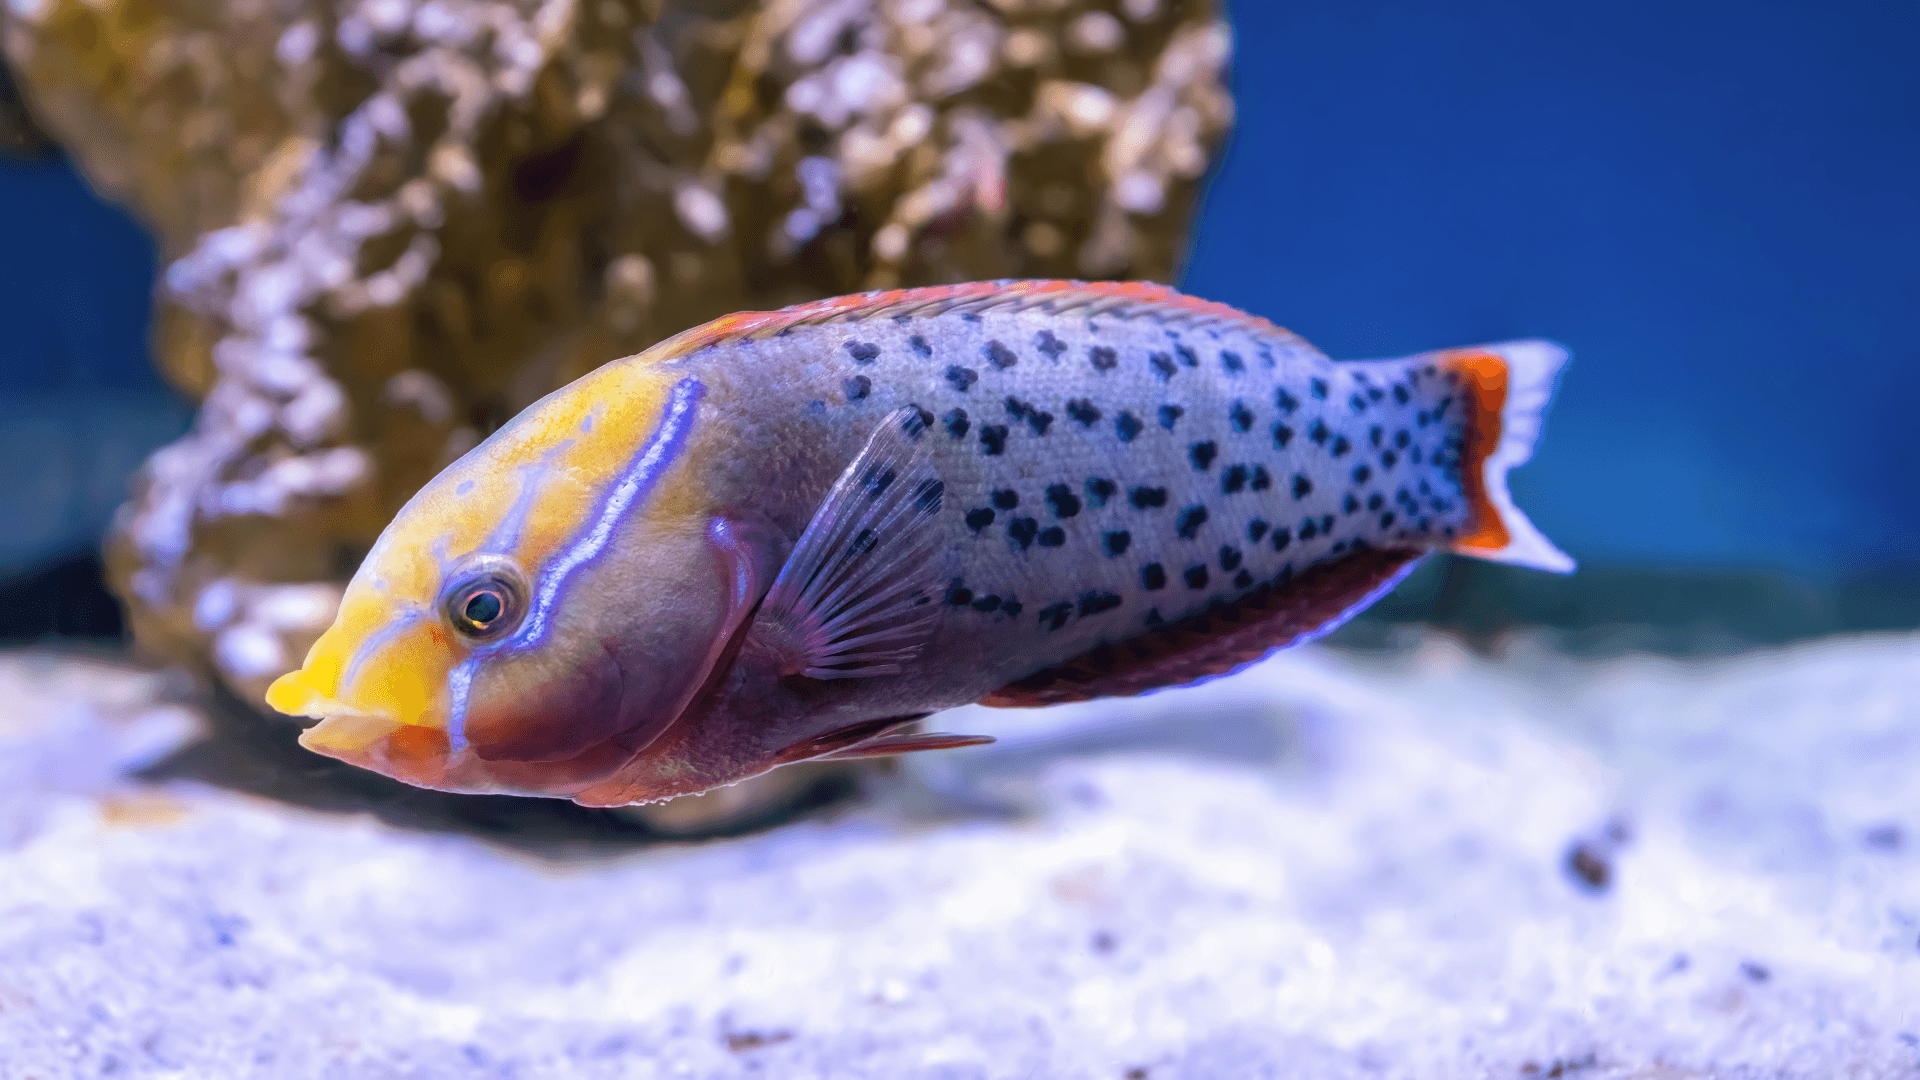 A photo of Formosa wrasse